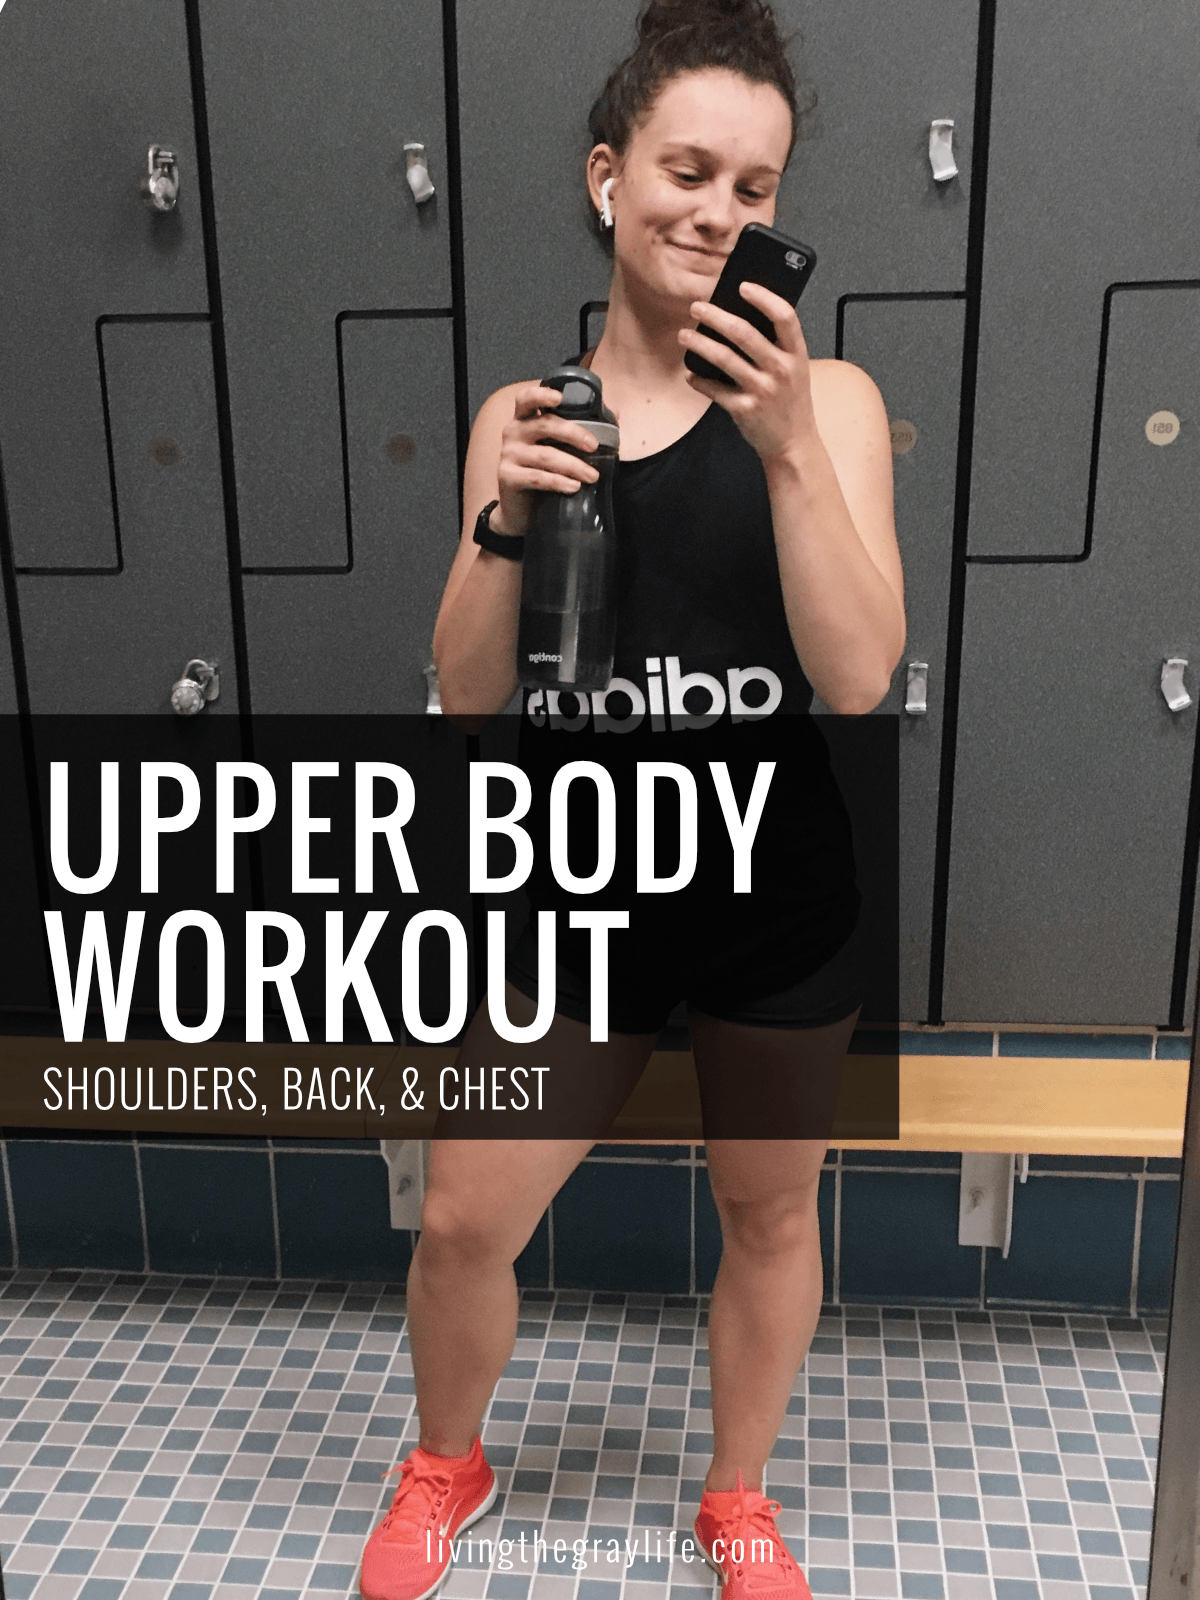 Upper Body Workout Blog Cover